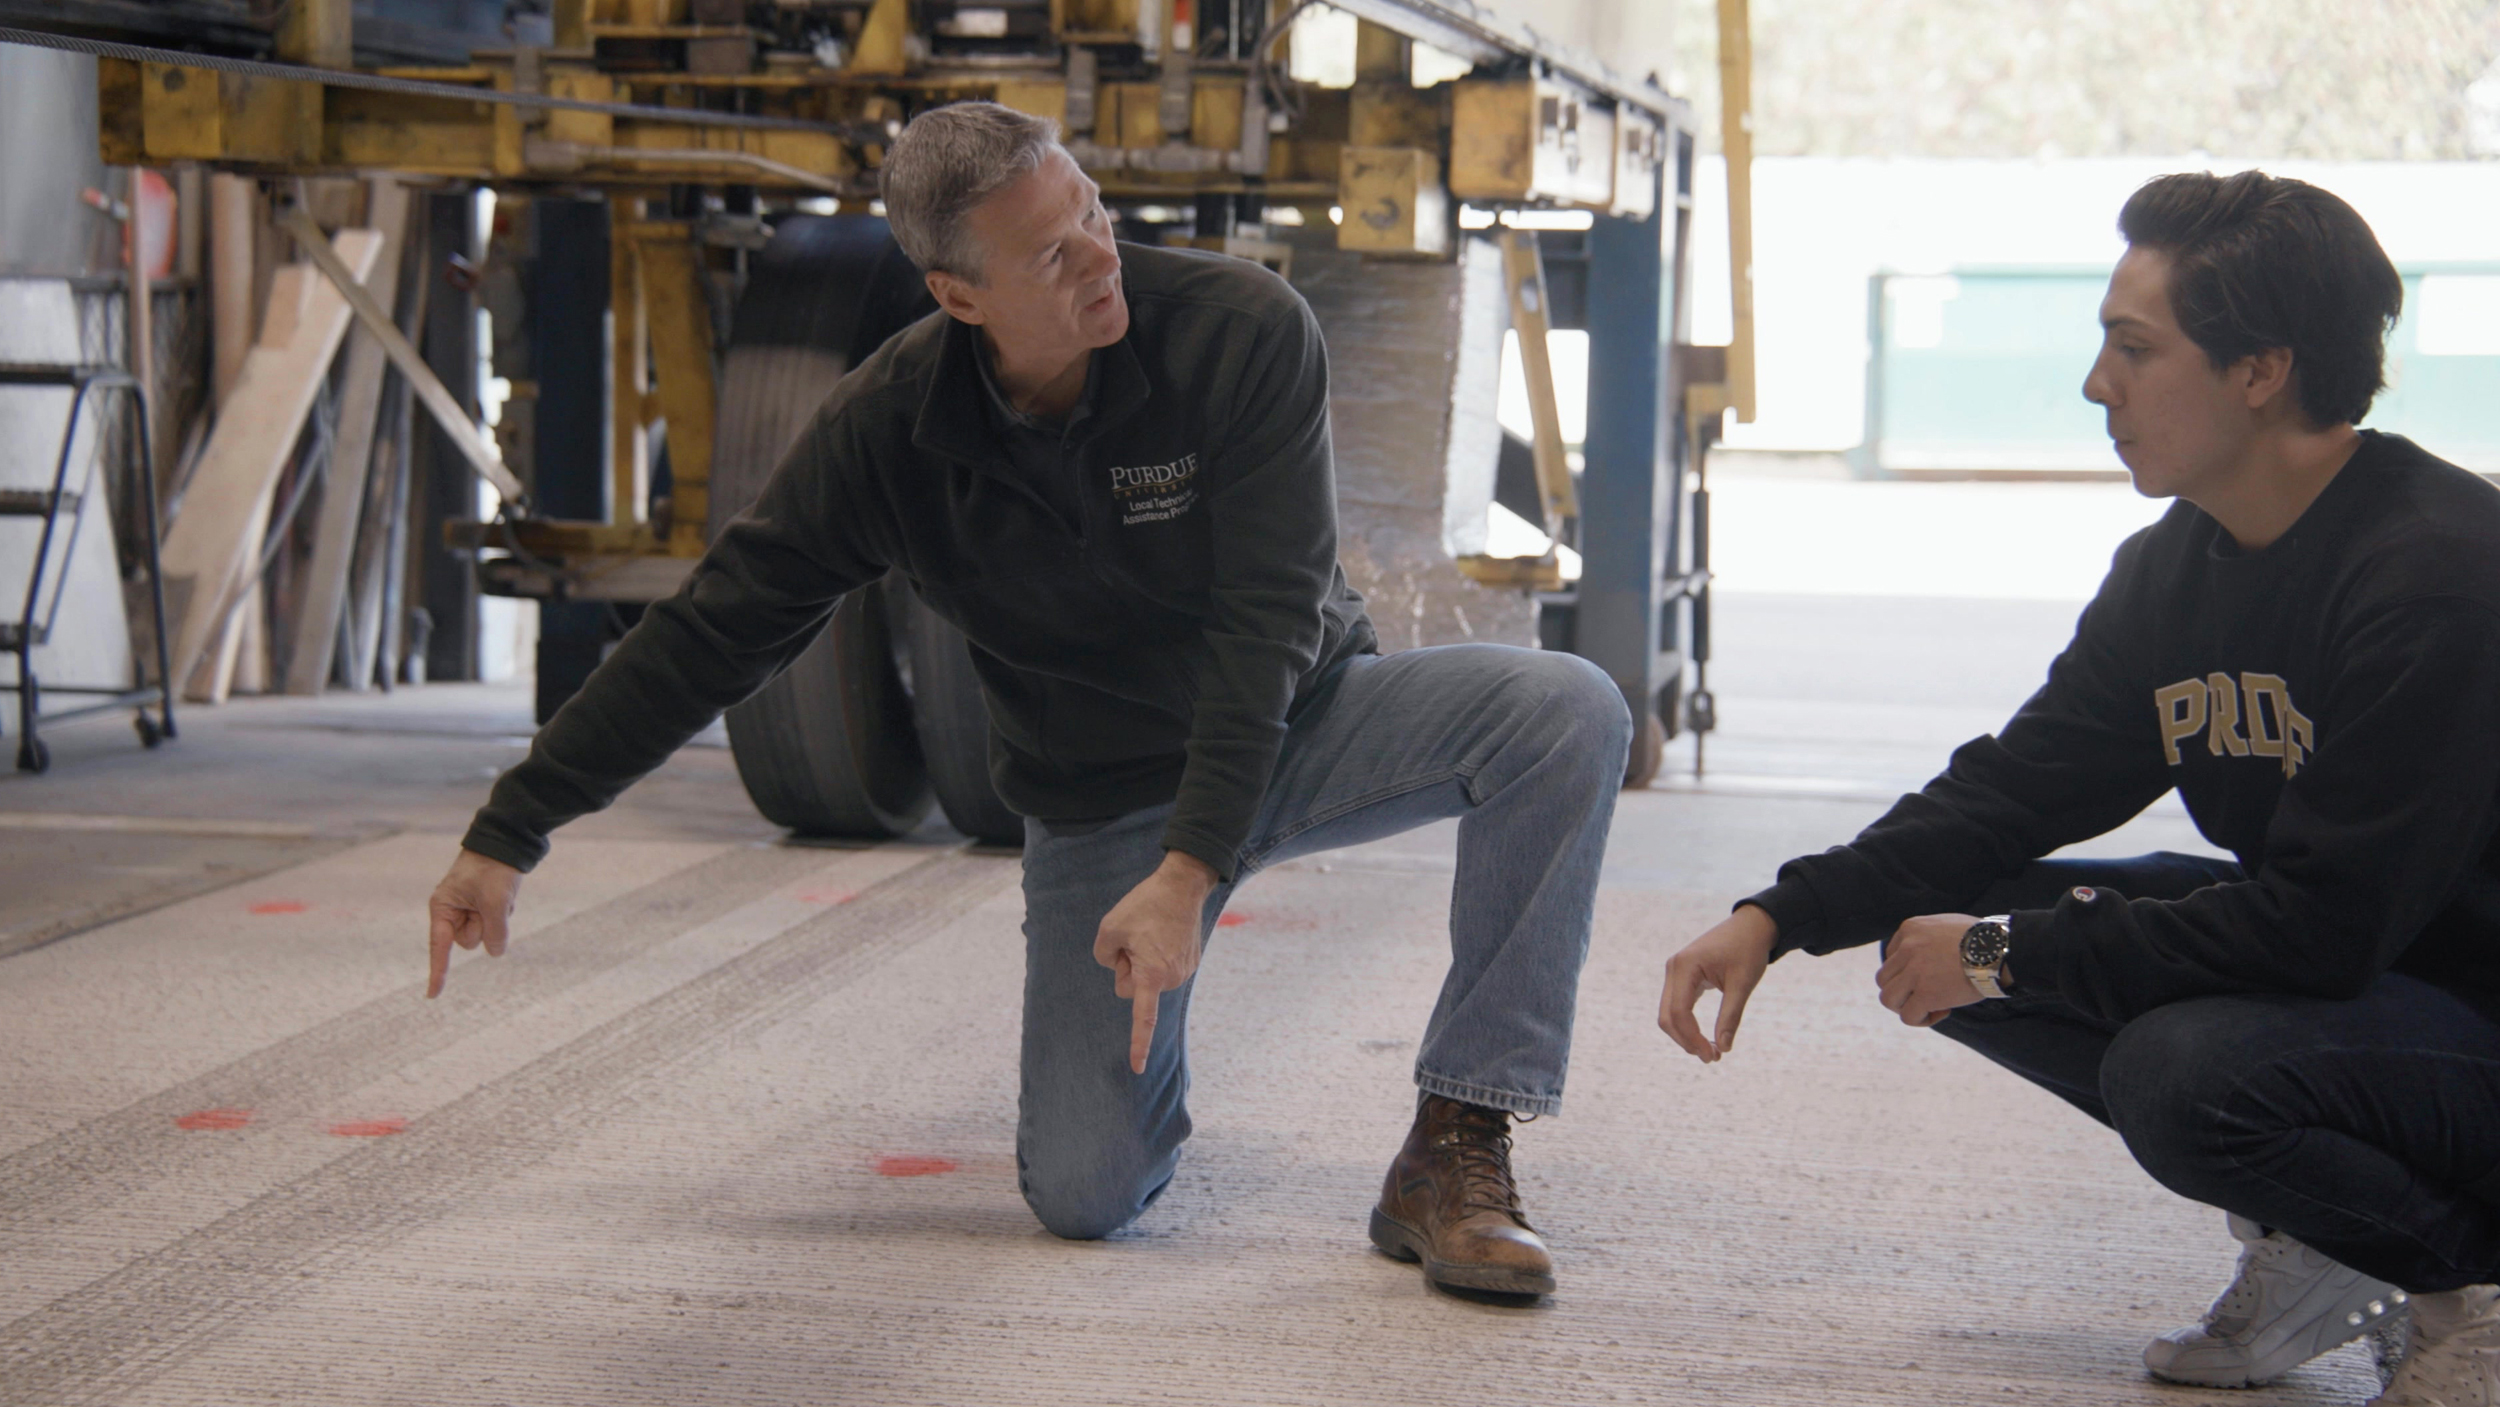 A man in jeans, a long sleeved shirt, and boots kneels on the floor and points as another man listens and kneels next to him.